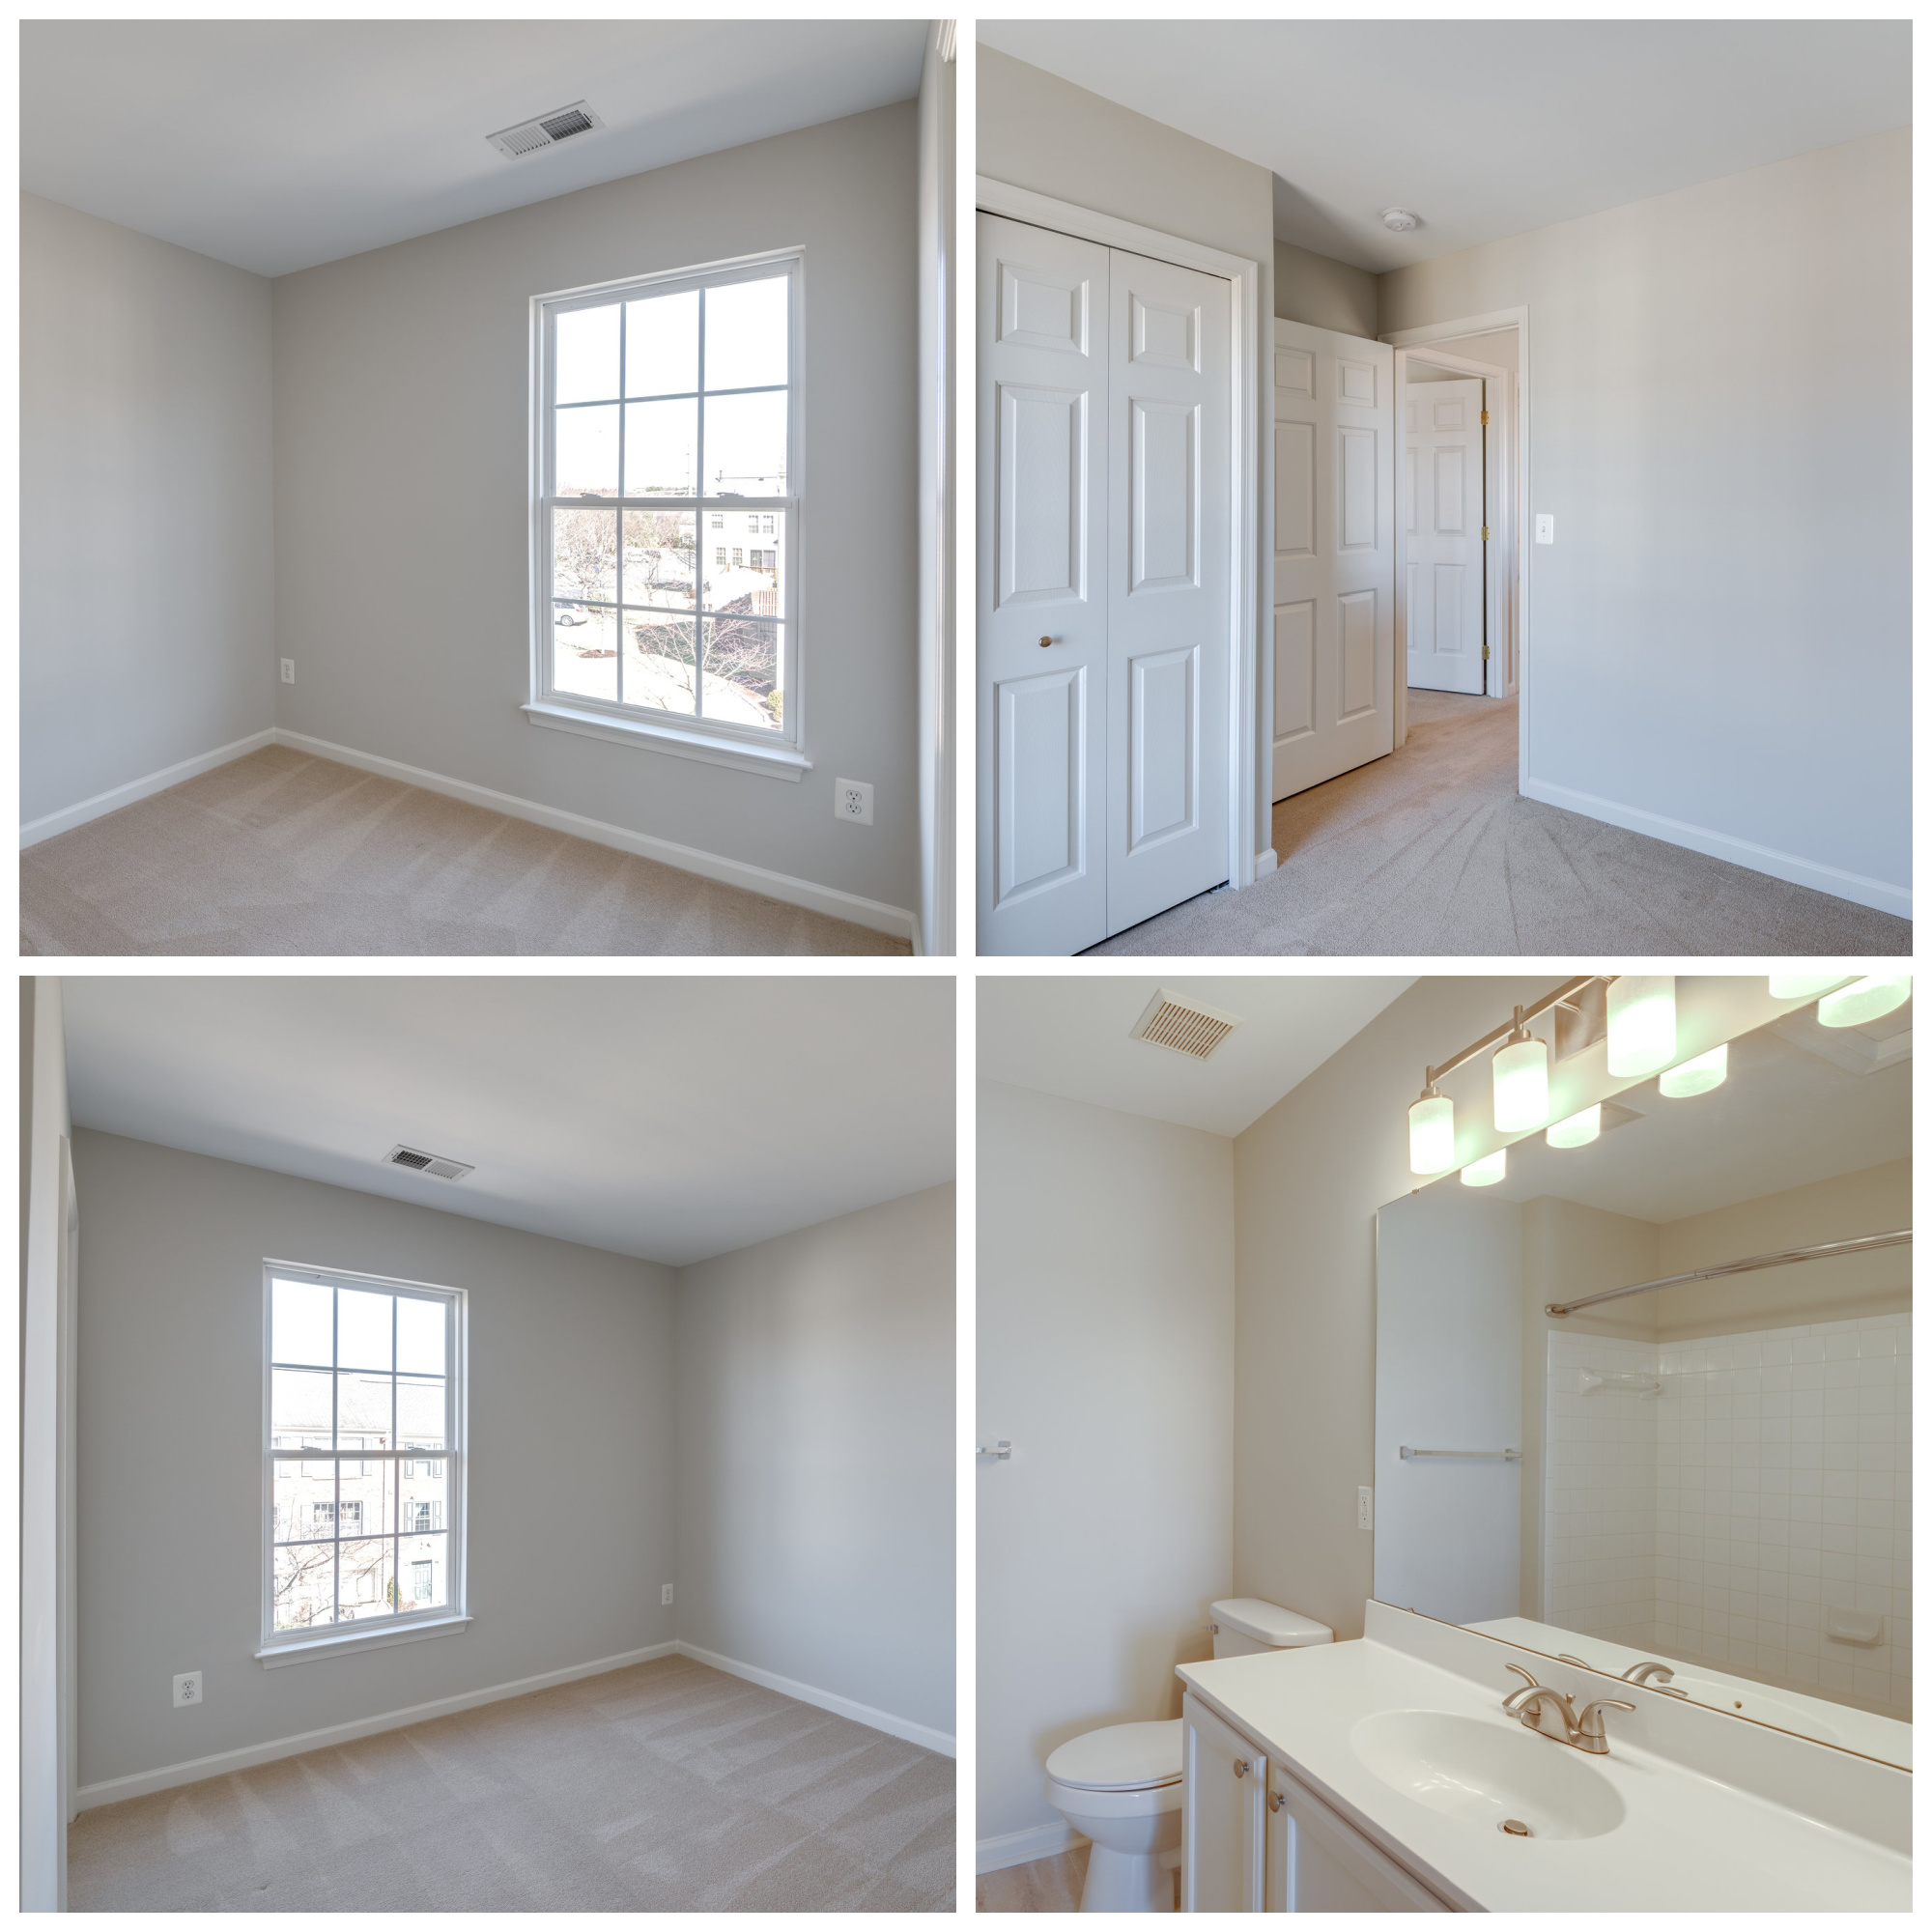 115 Shadwell Ter SE, Leesburg- Additional Bedrooms and Bath